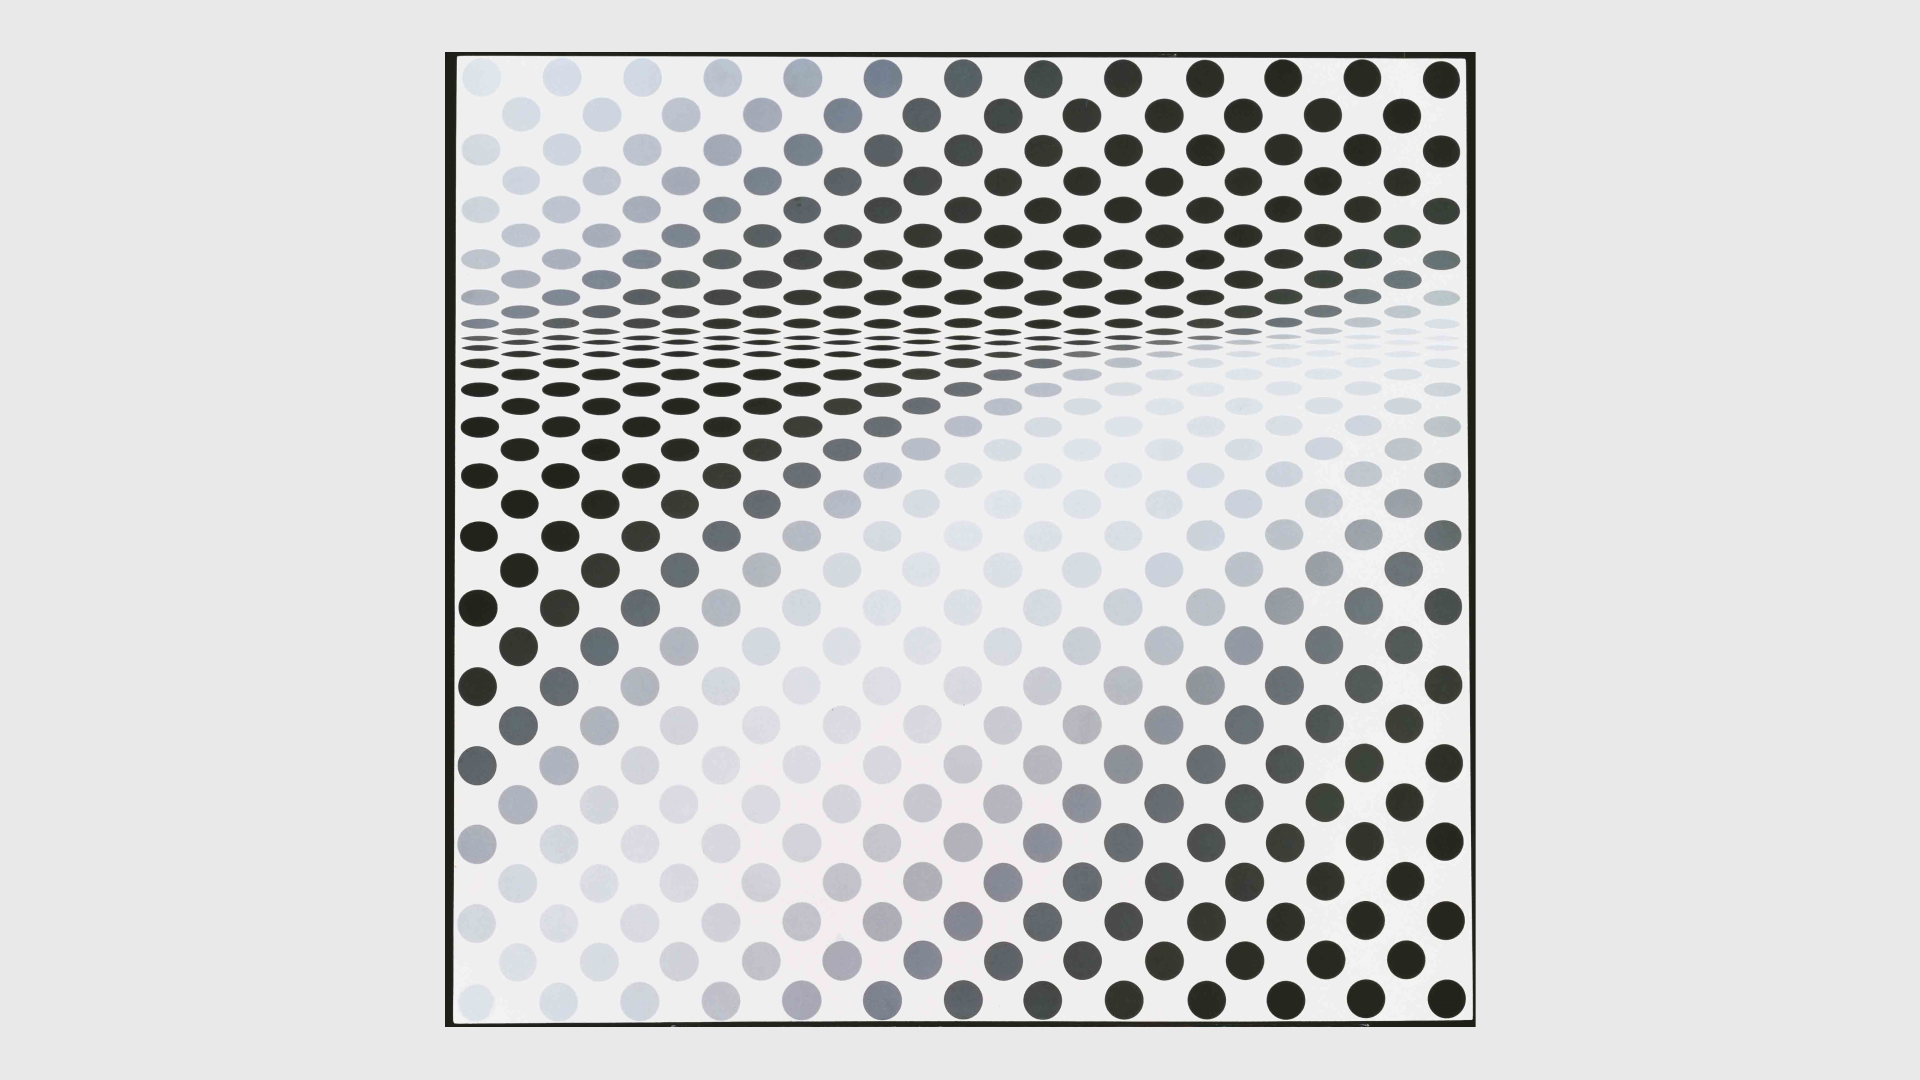 A painting by Bridget Riley, titled Hesitate, dated 1964.